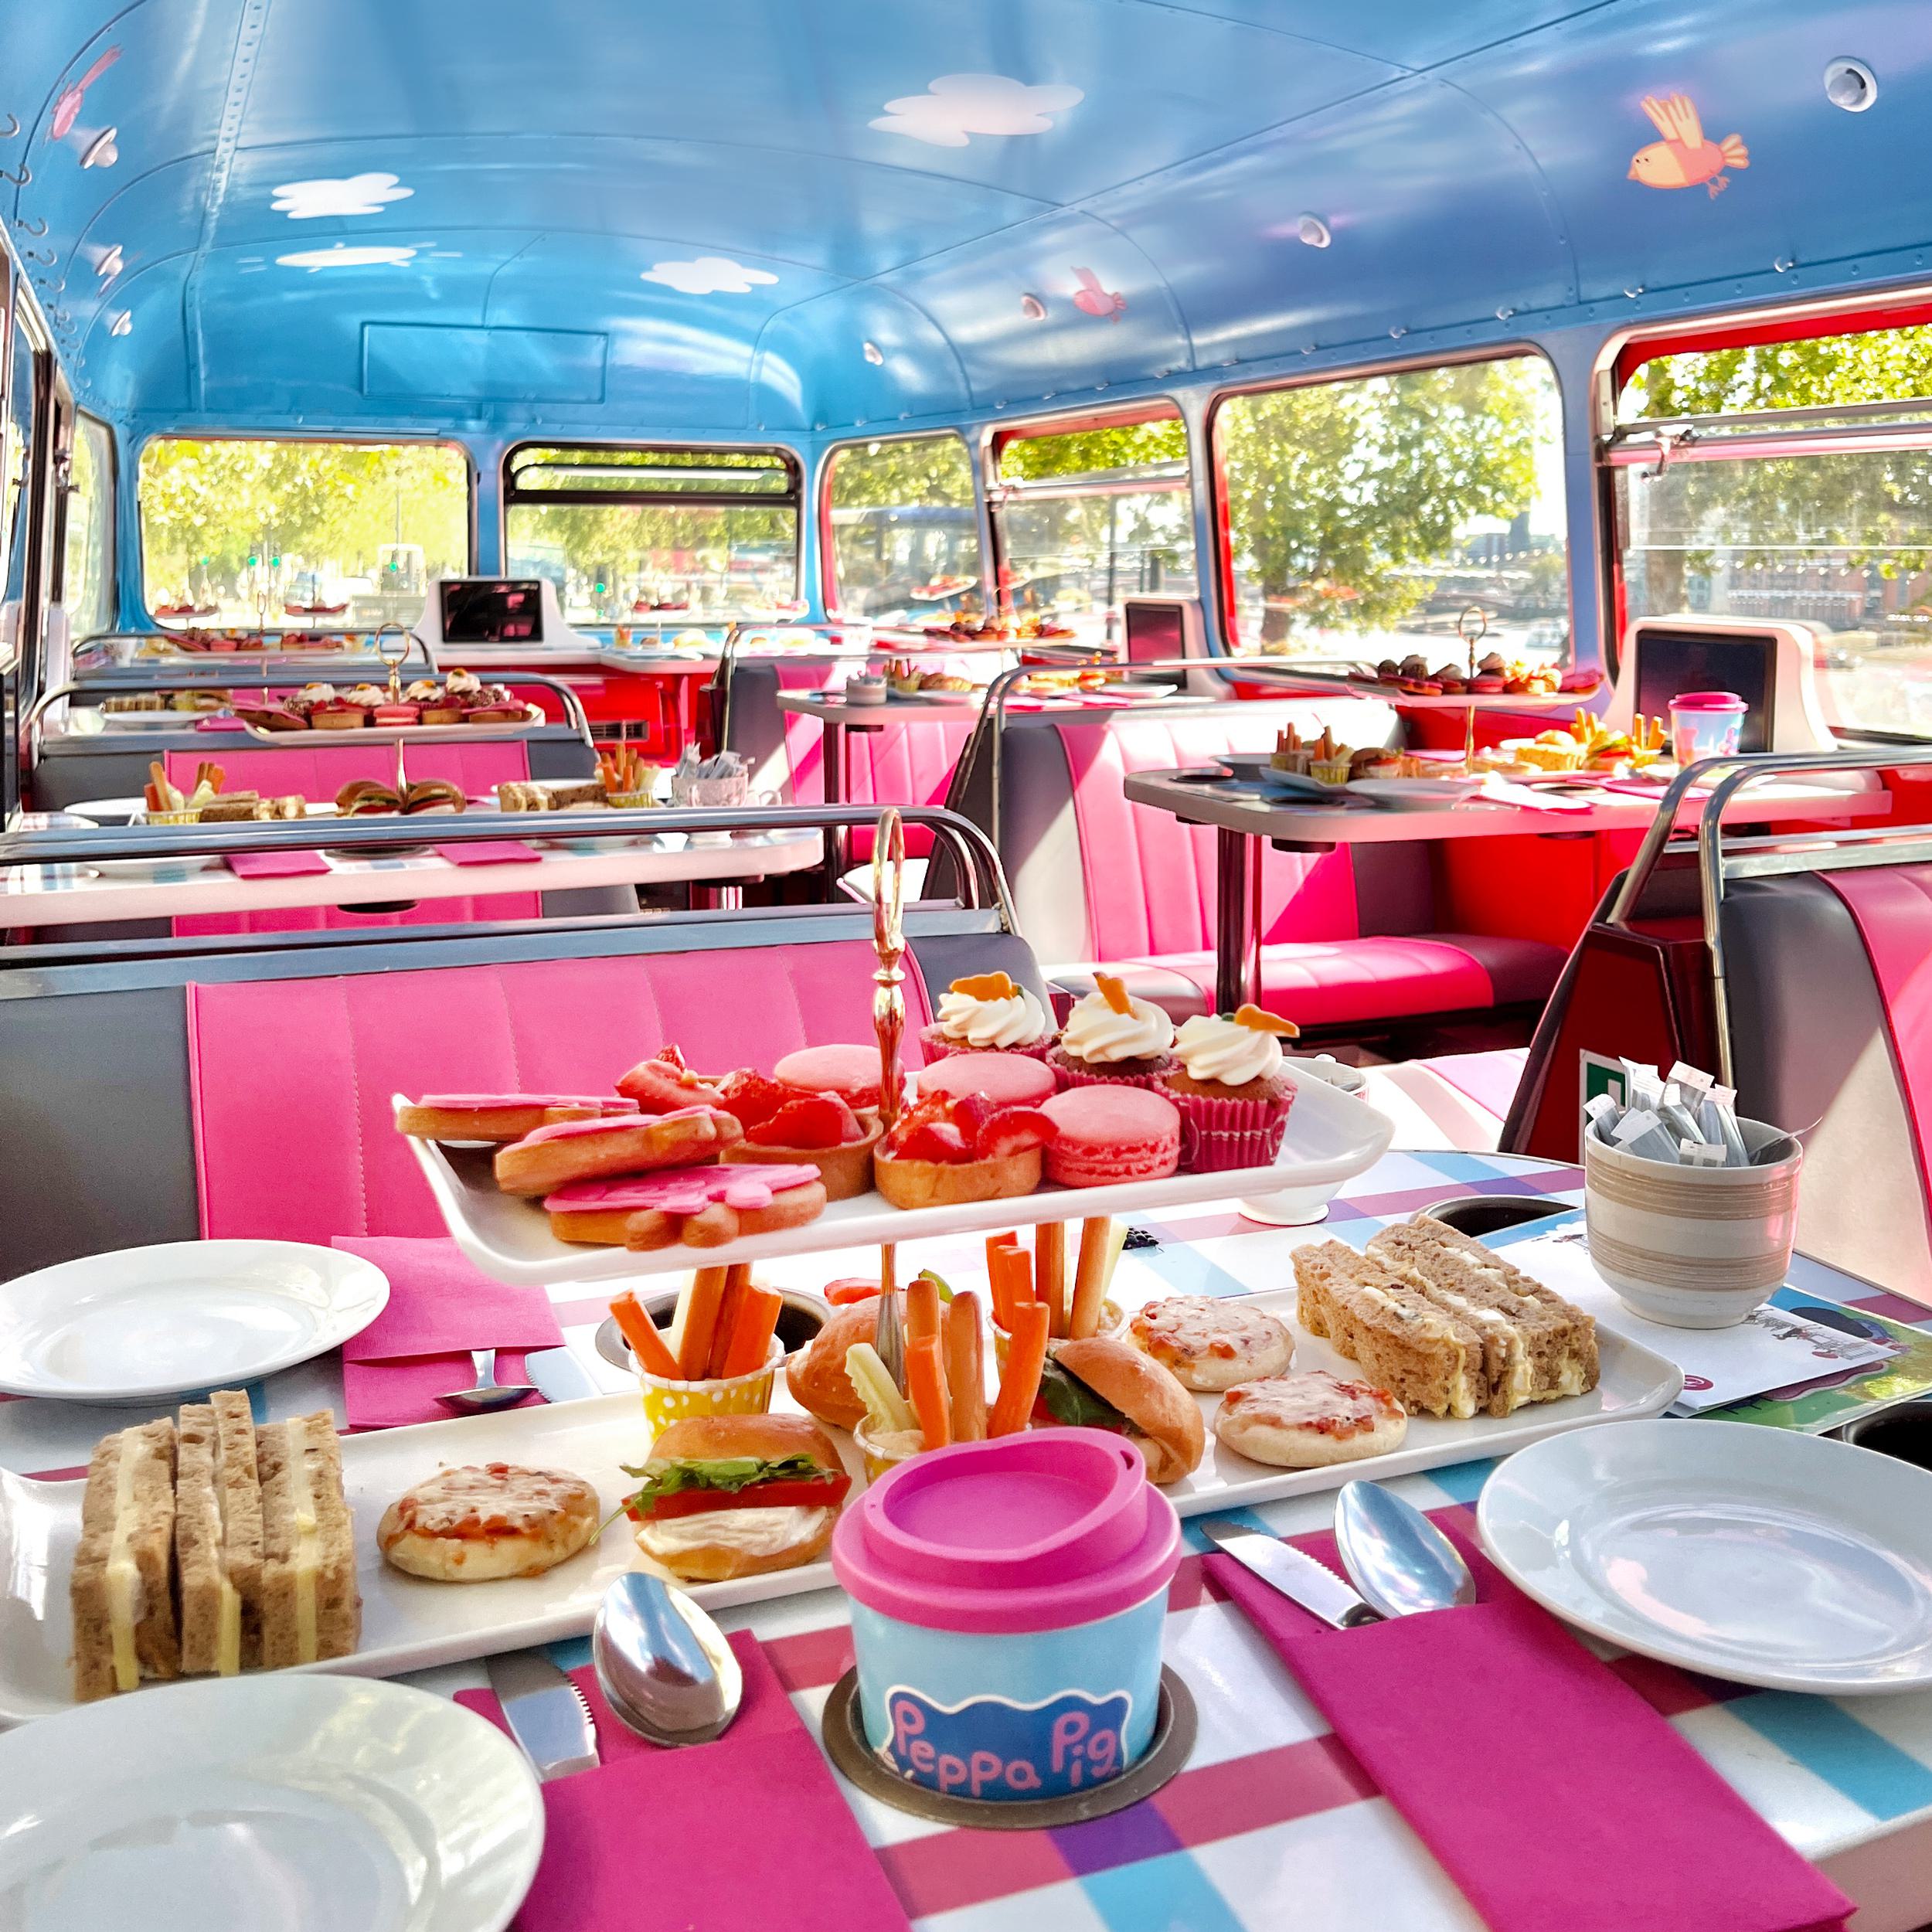 Fun things to do in London at Easter: Peppa Pig Afternoon Tea Bus Tour